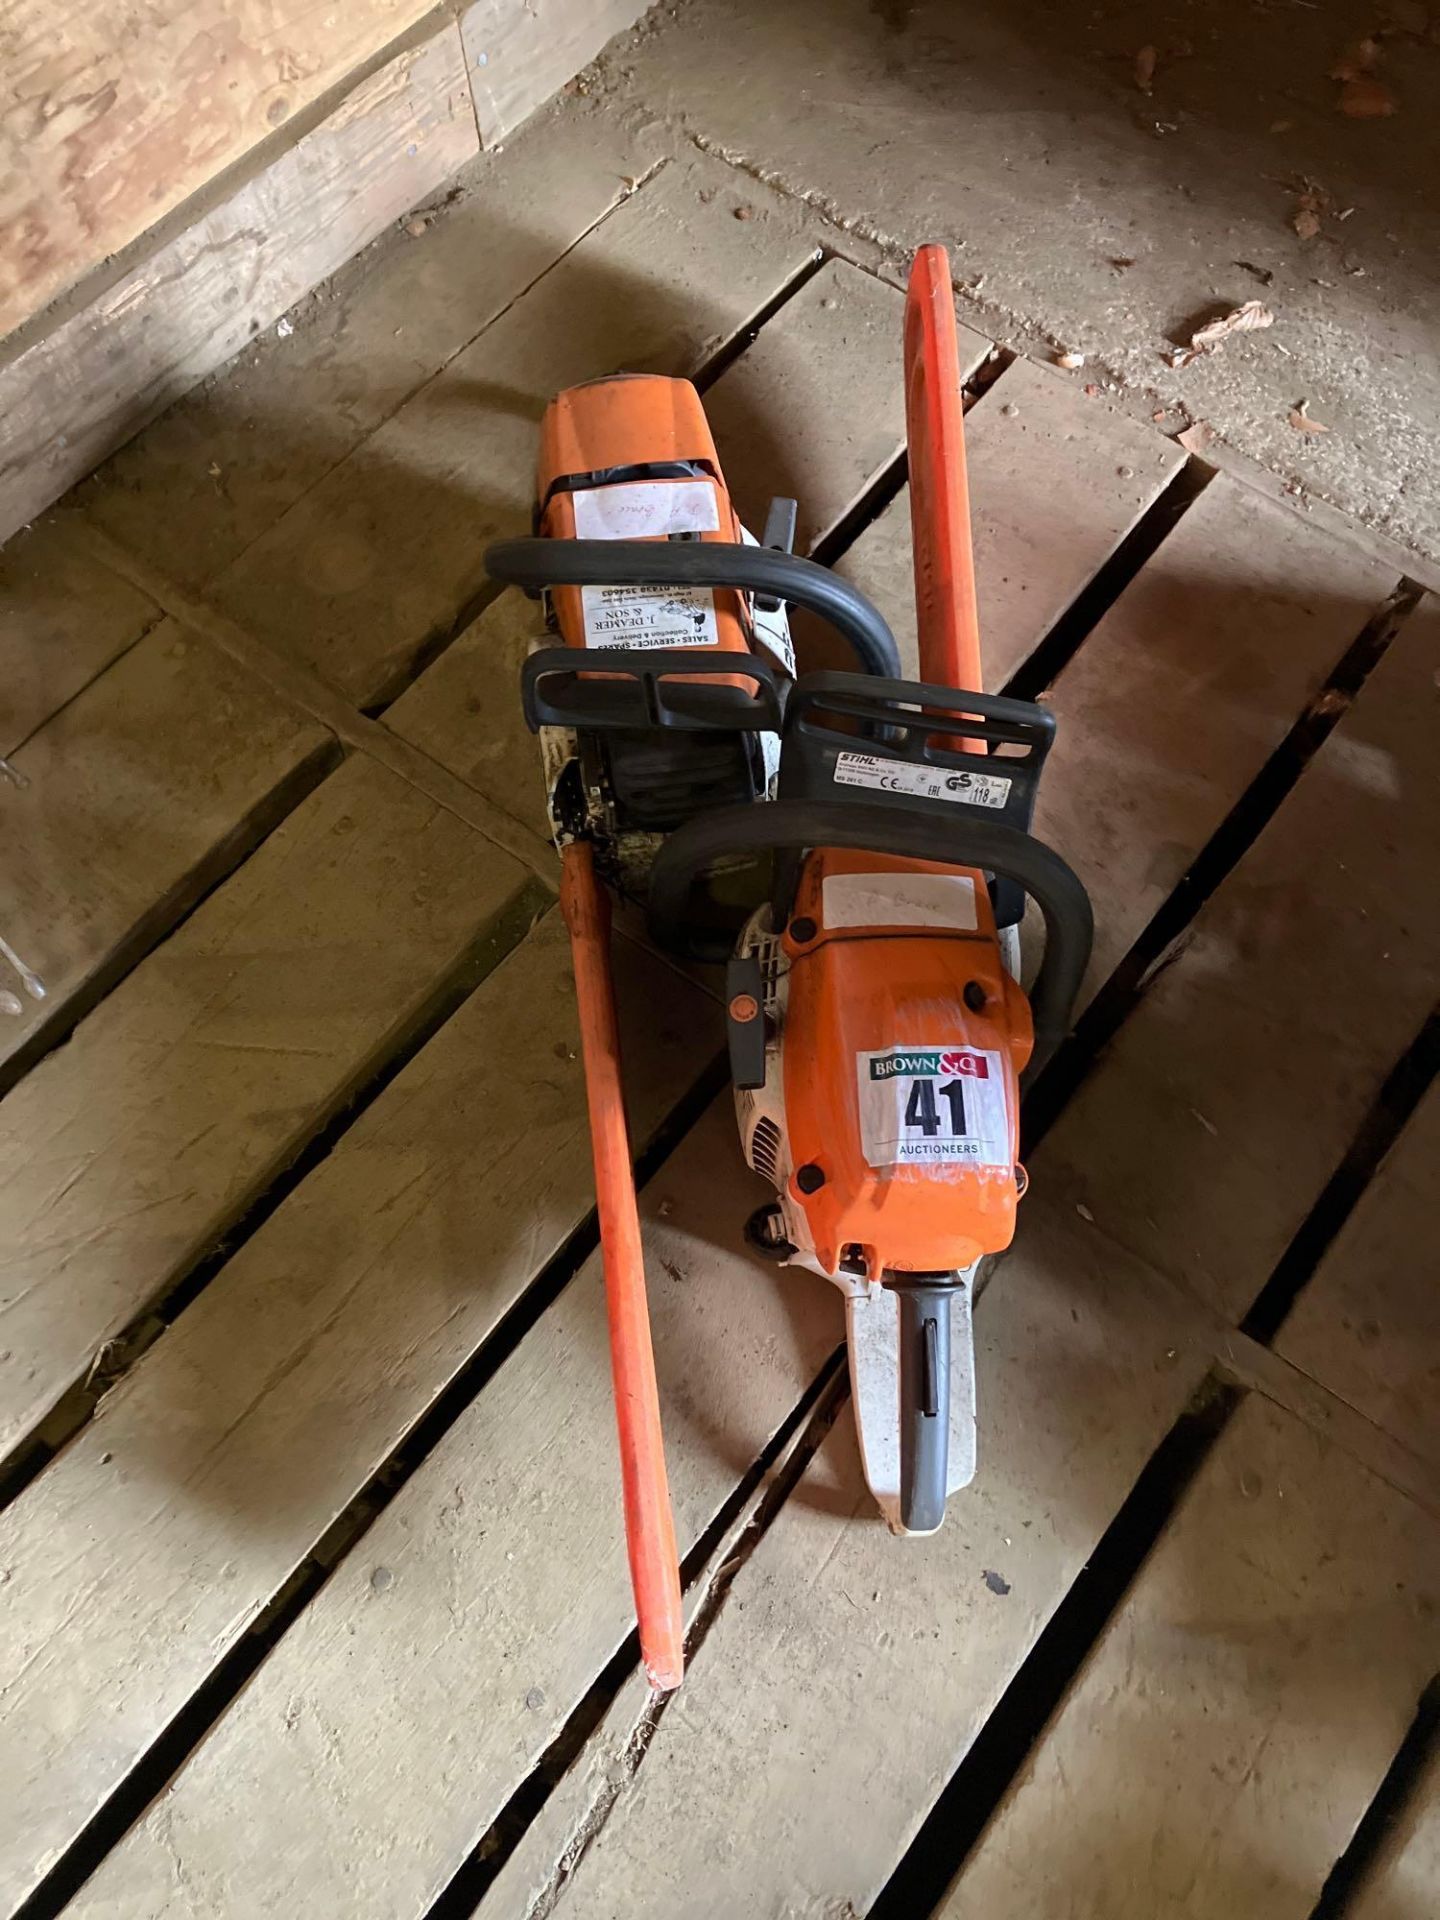 Stihl MS561C and Stihl MS341 petrol chainsaws, spares or repair